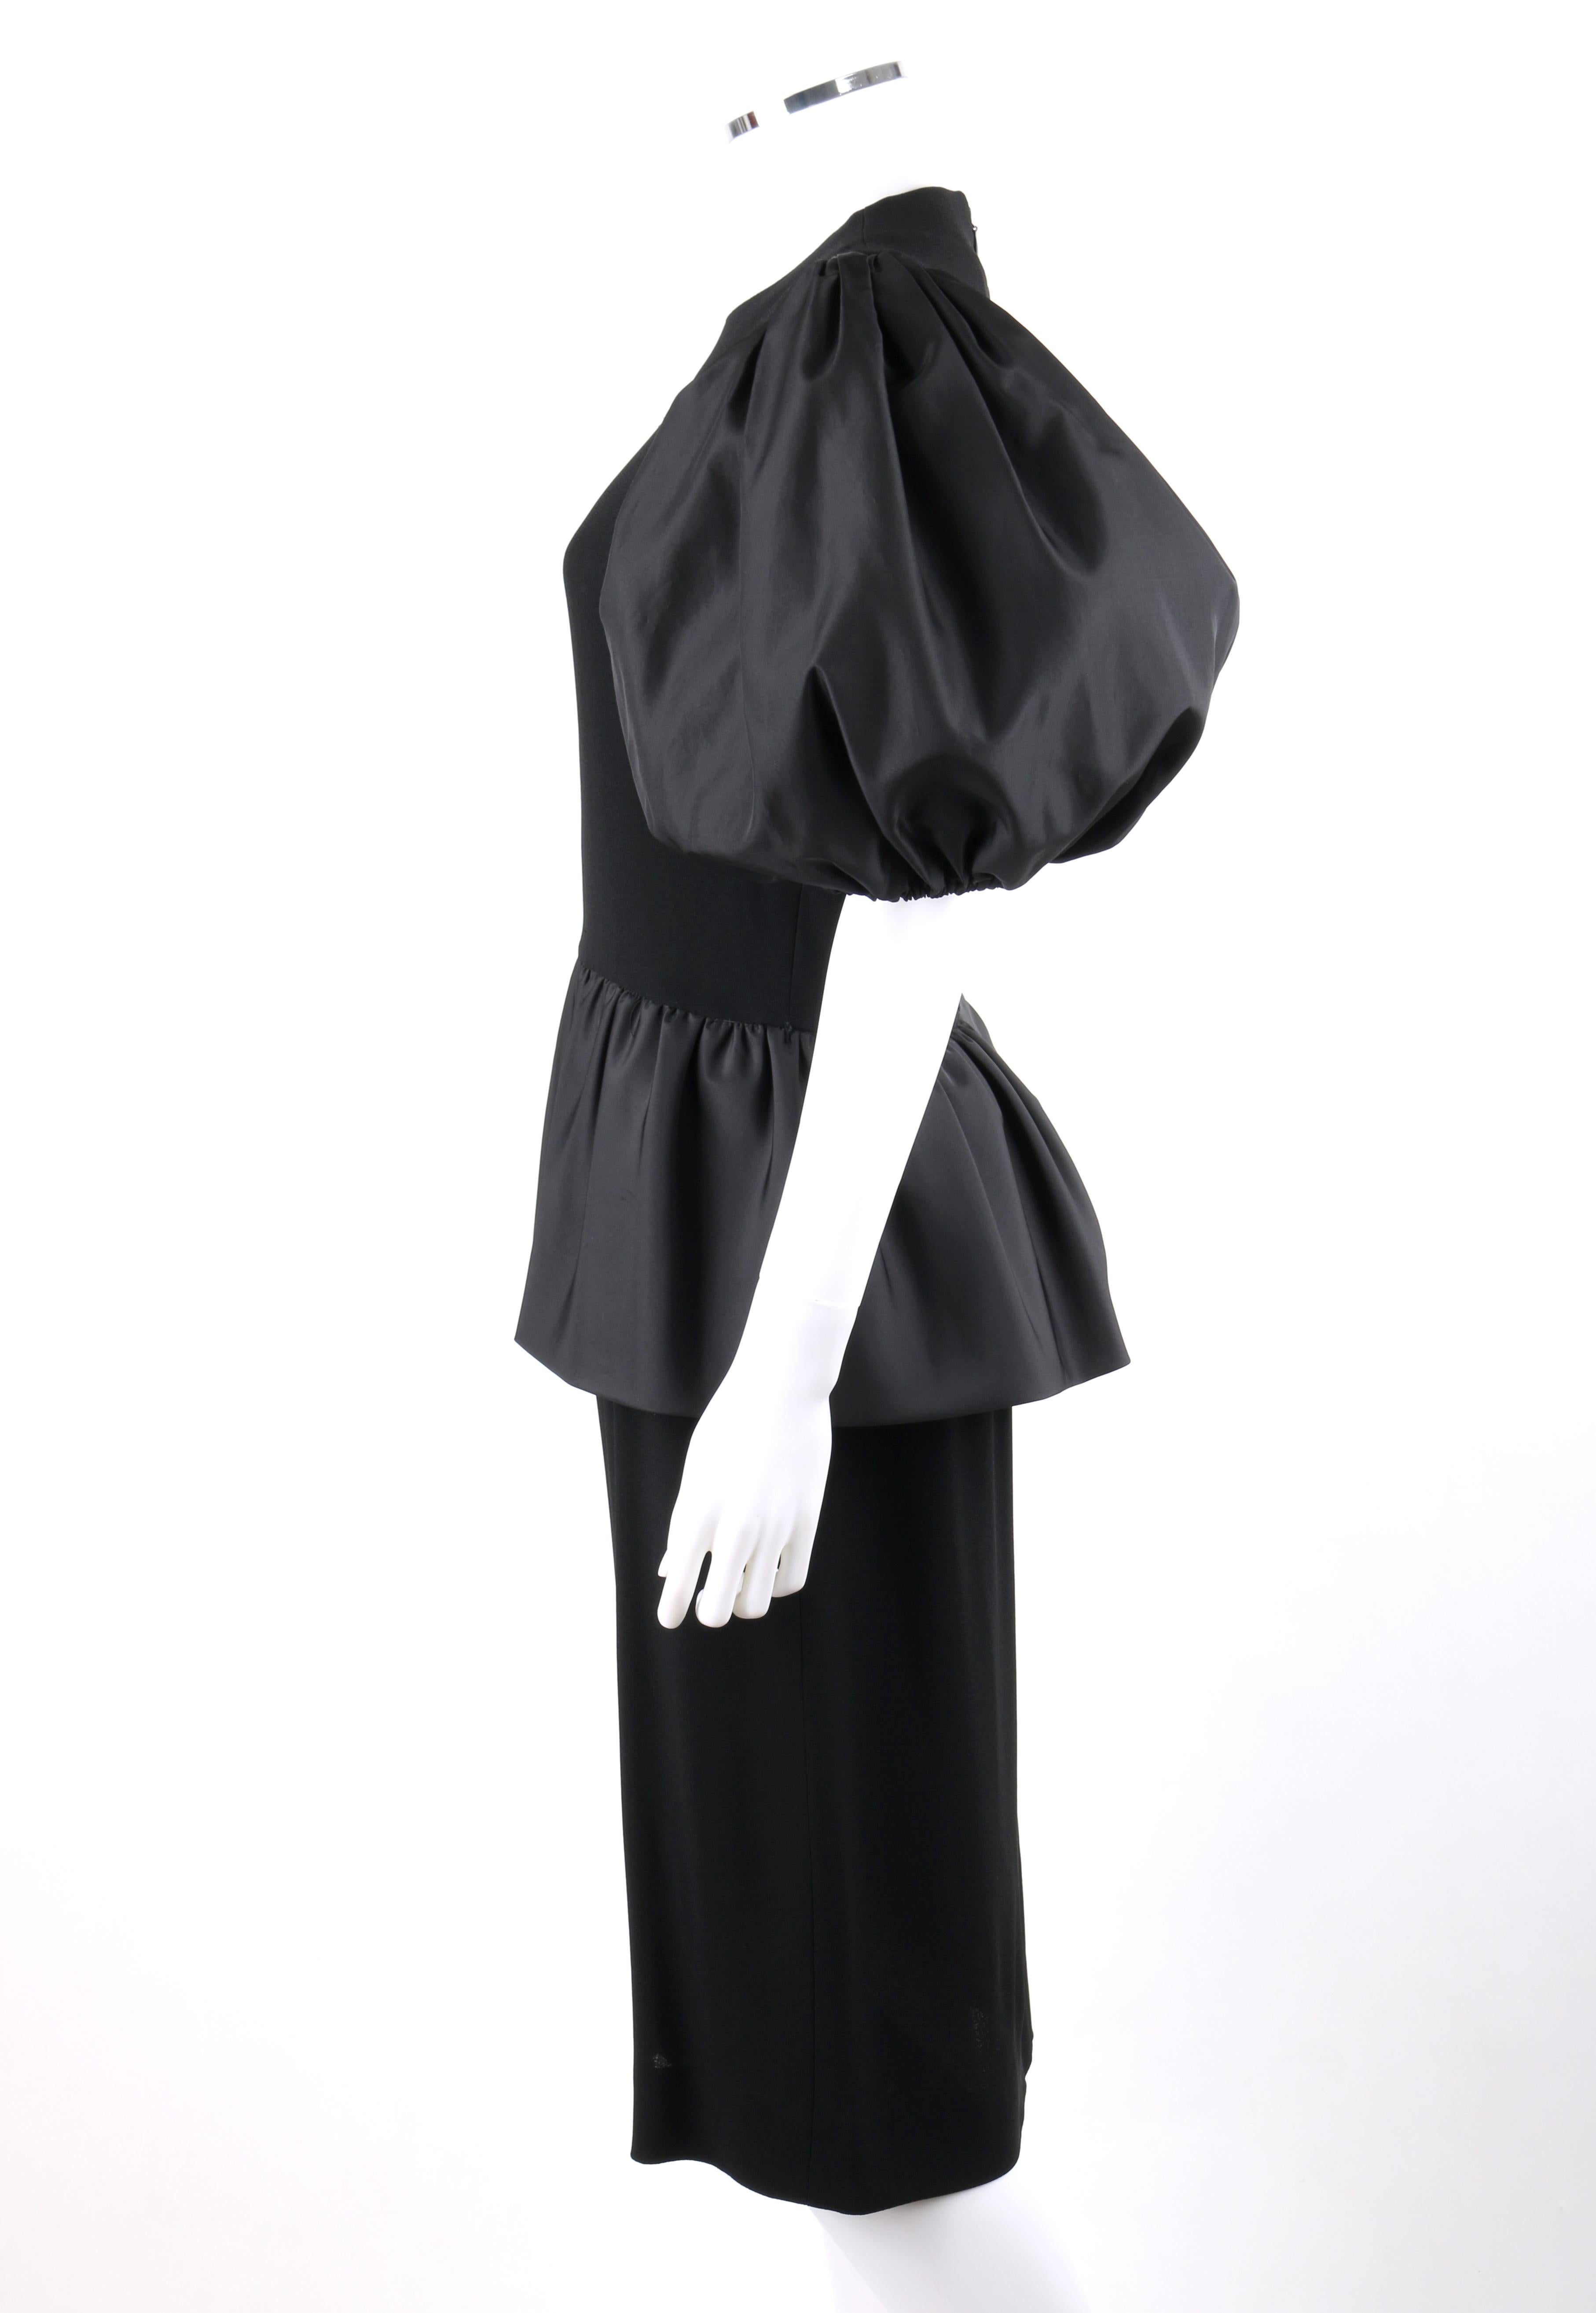 BILL BLASS c.1980's Black Crepe Dramatic Puff Sleeve Peplum Skirt Party Dress In Good Condition For Sale In Thiensville, WI